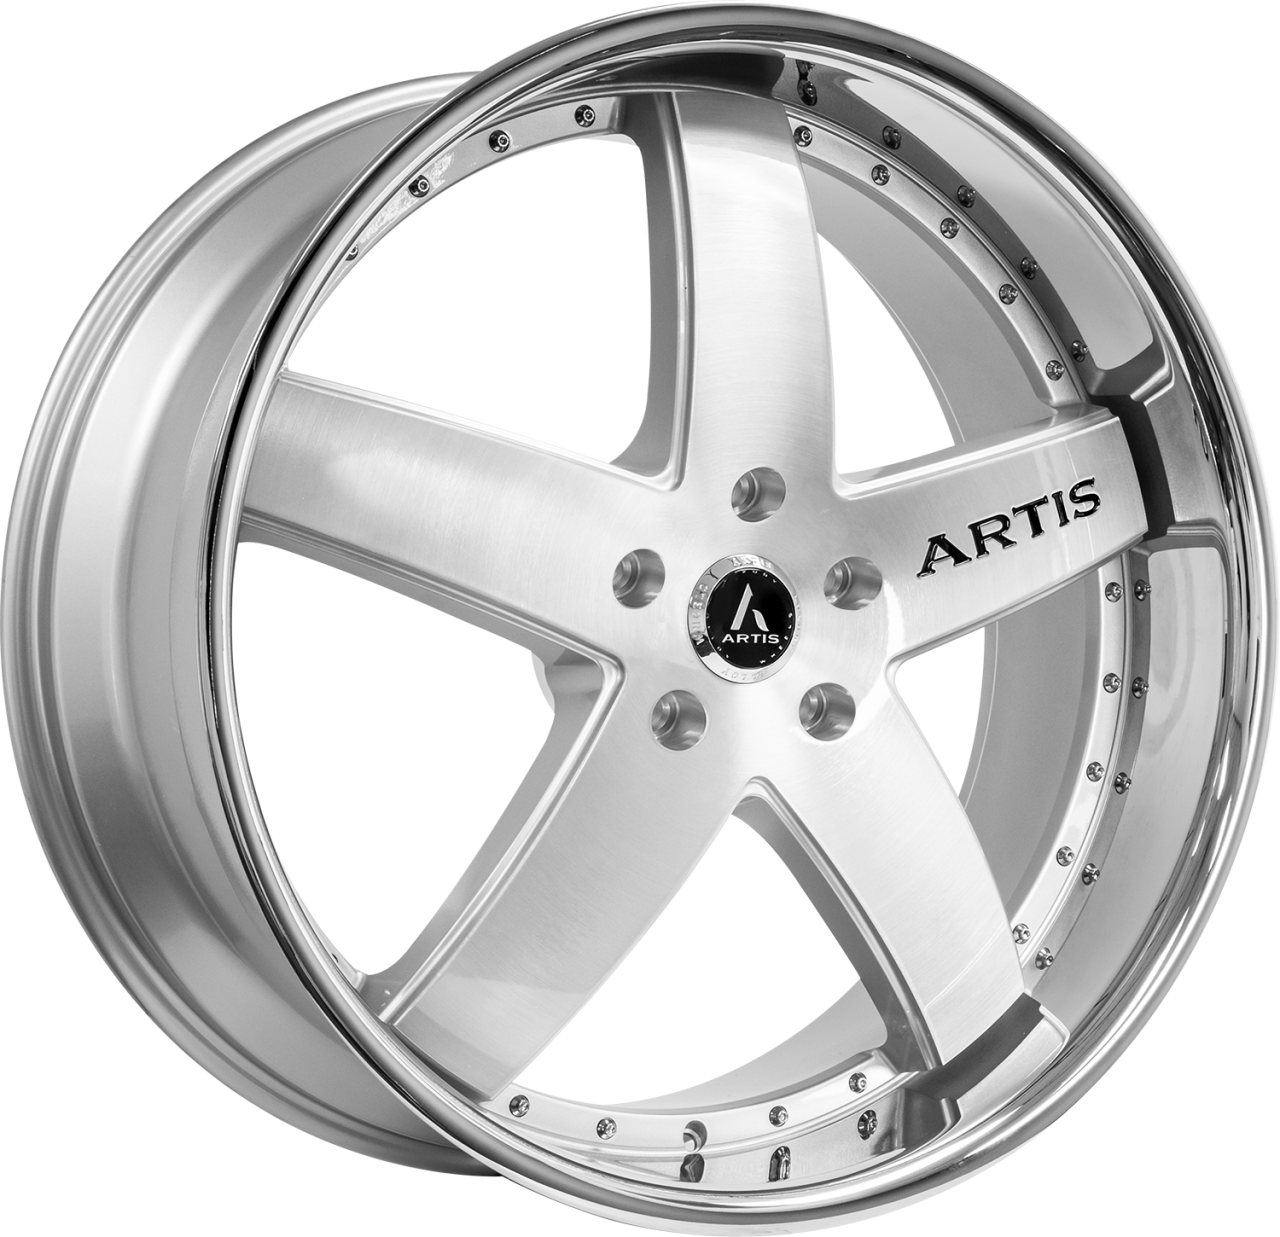 Artis Forged Booya wheel with SMS finish